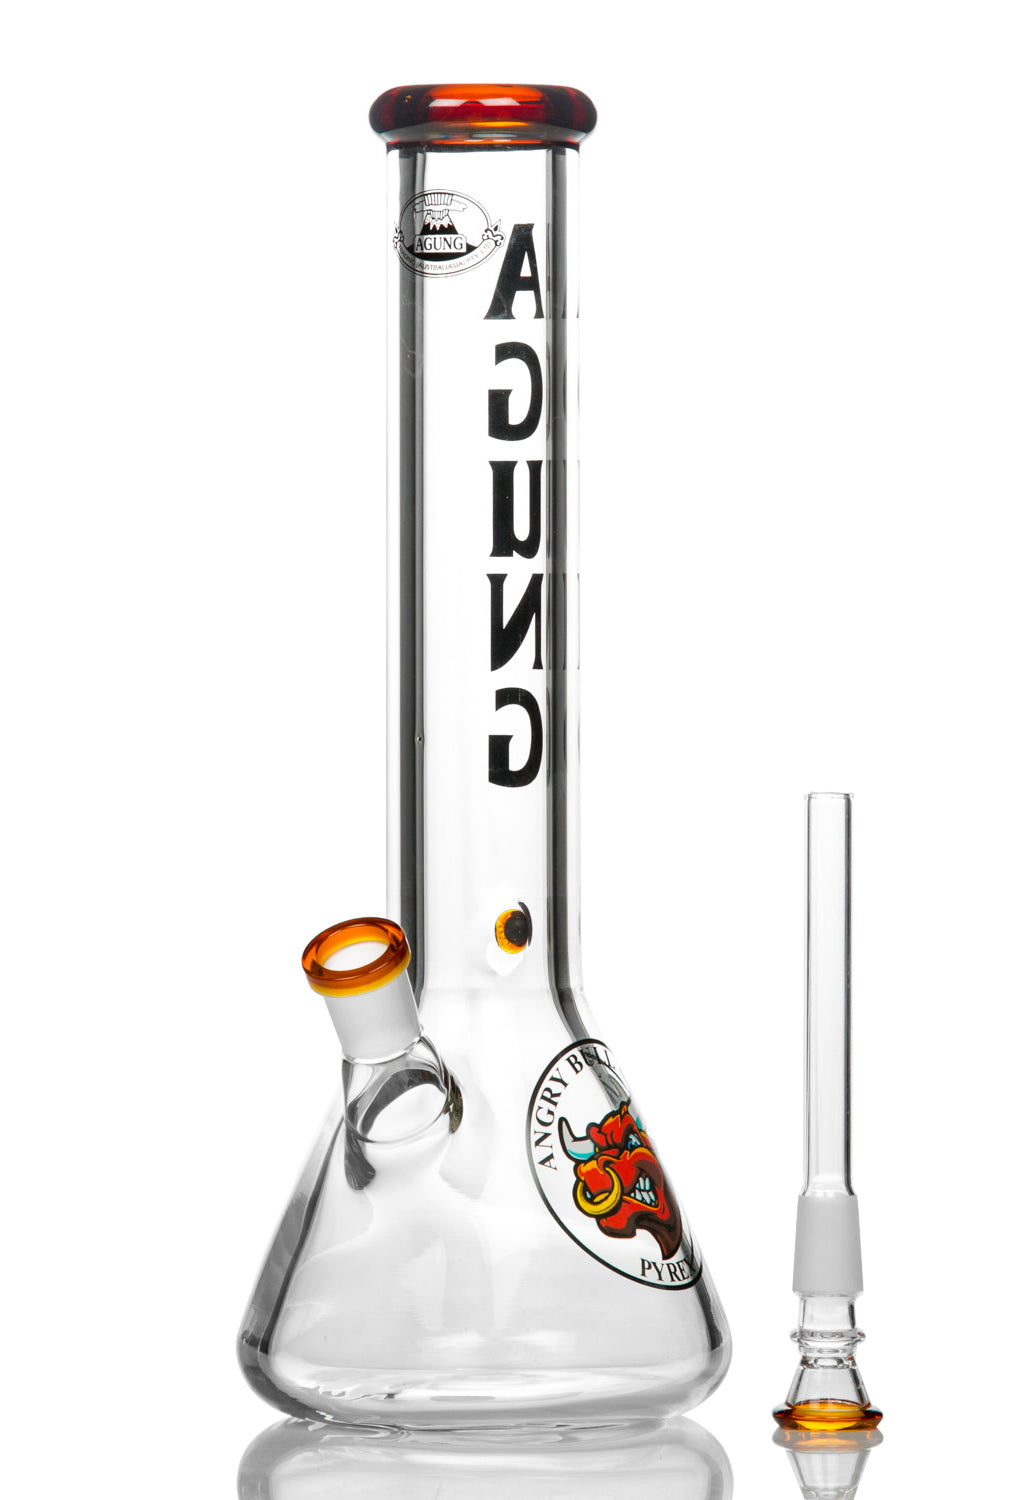 Agung angry bull glass bong with glass down stem and cone piece.